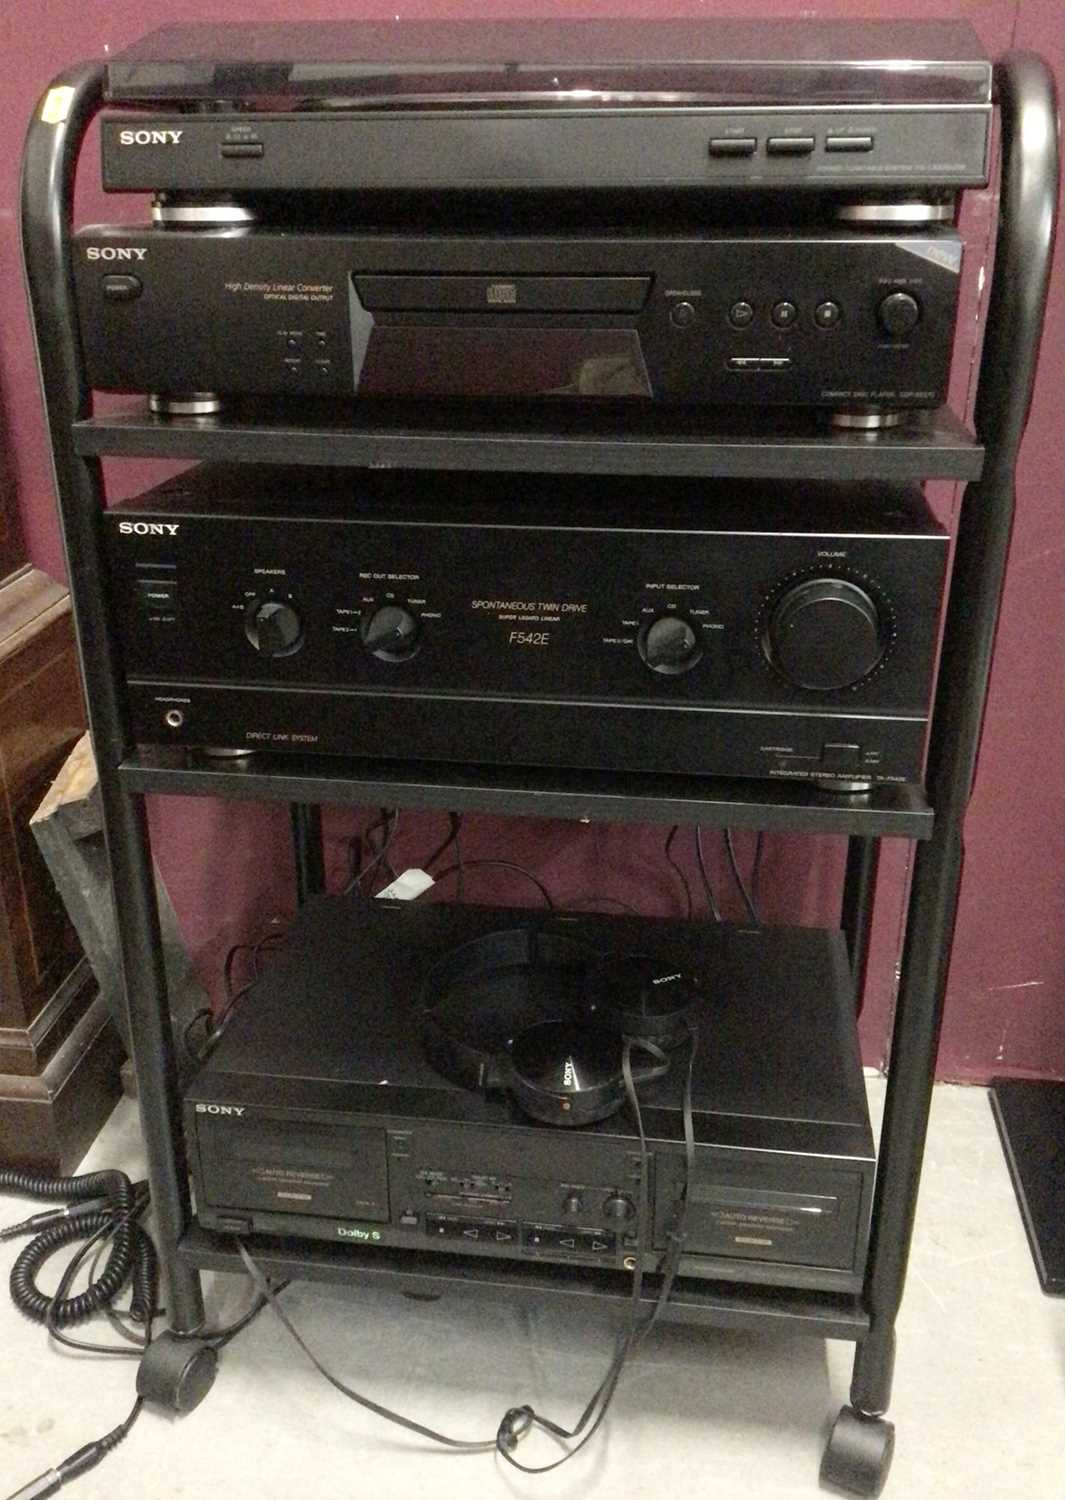 Sony stack stereo system including a stereo turntable system PS-LX3000USB, compact disc player CDP-X